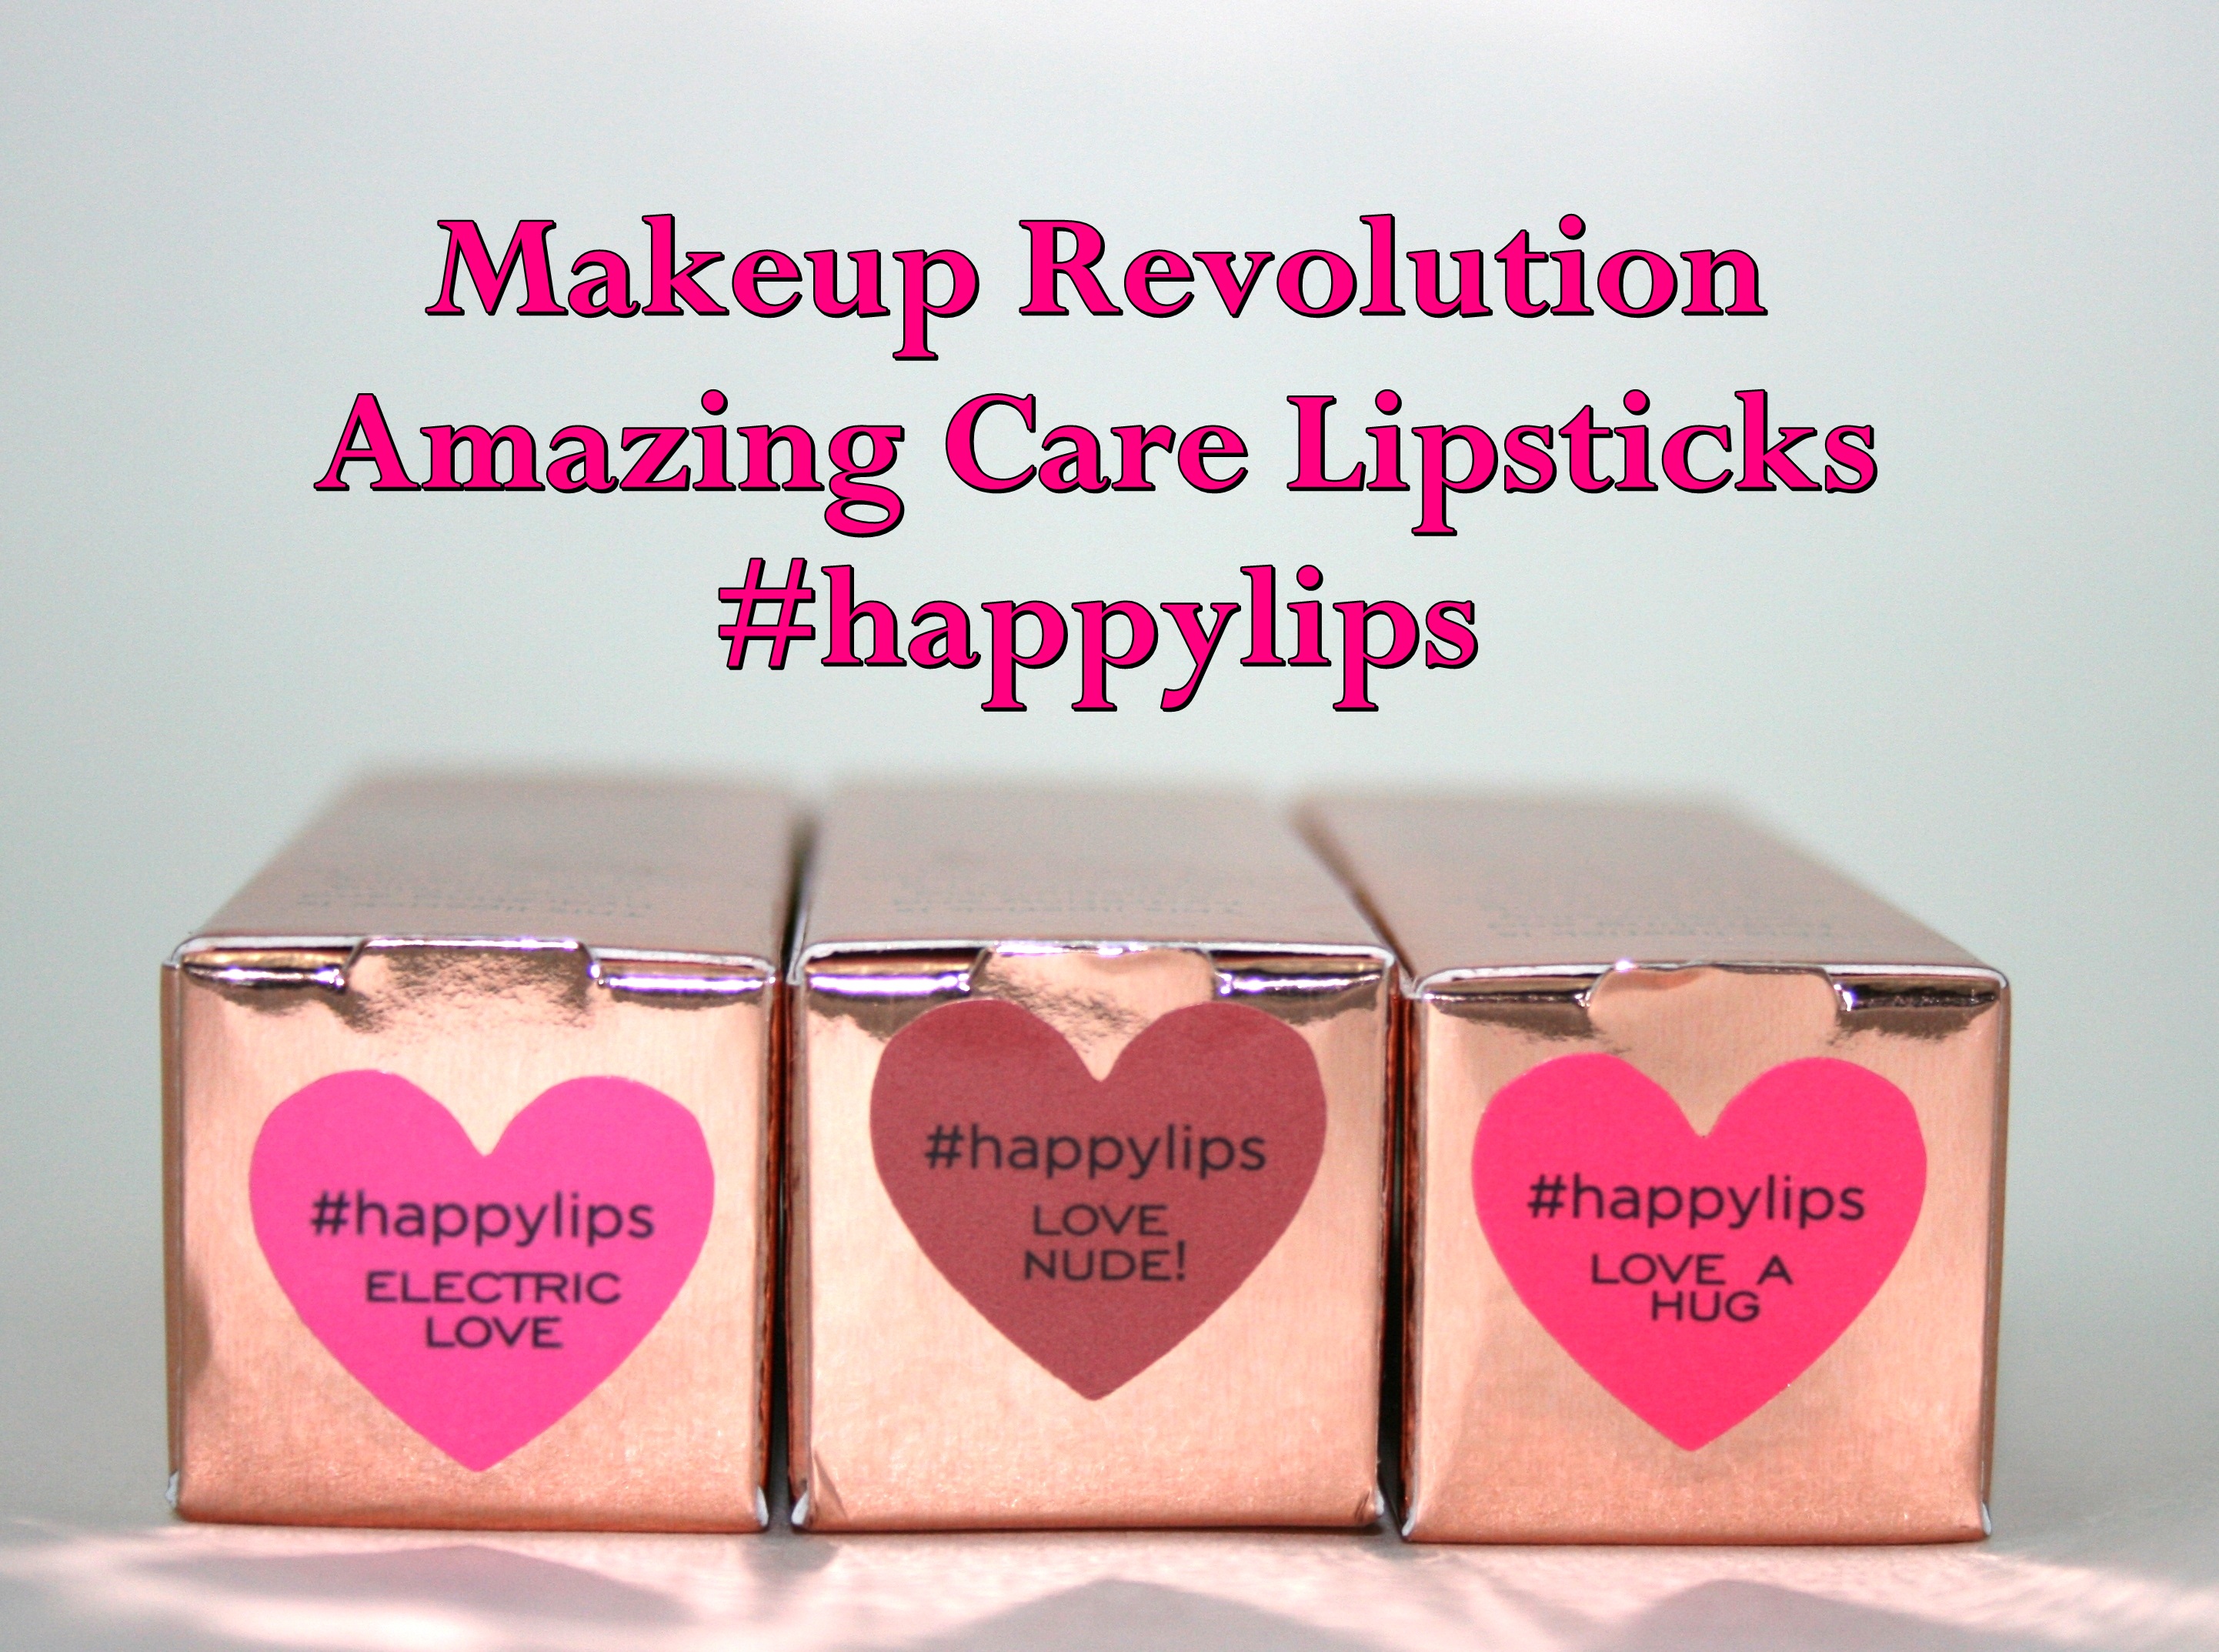 Makeup Revolution Amazing Care Lipstick #happylips in Love a Hug, Love Nude! and Electric Beauty Geek